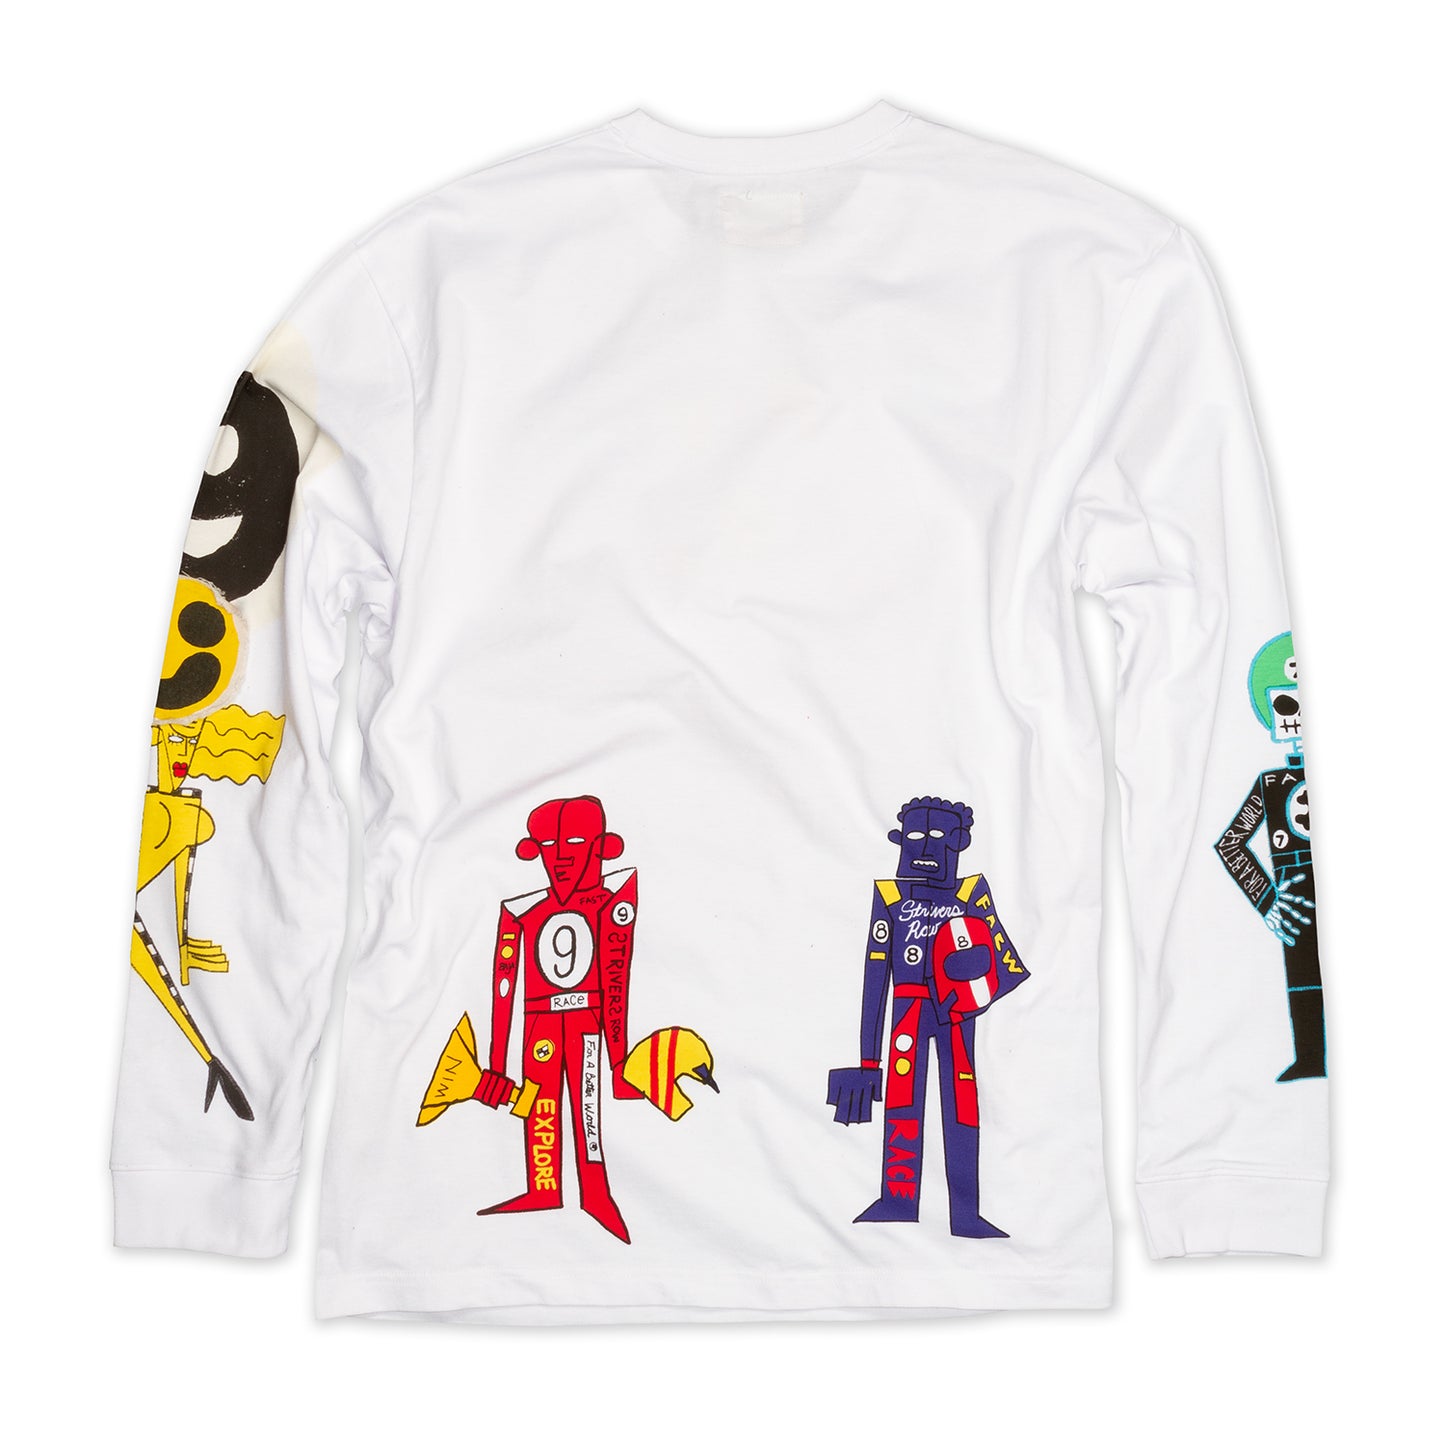 Men's White Tank Long Sleeve Graphic T-Shirt with Print On Sleeve